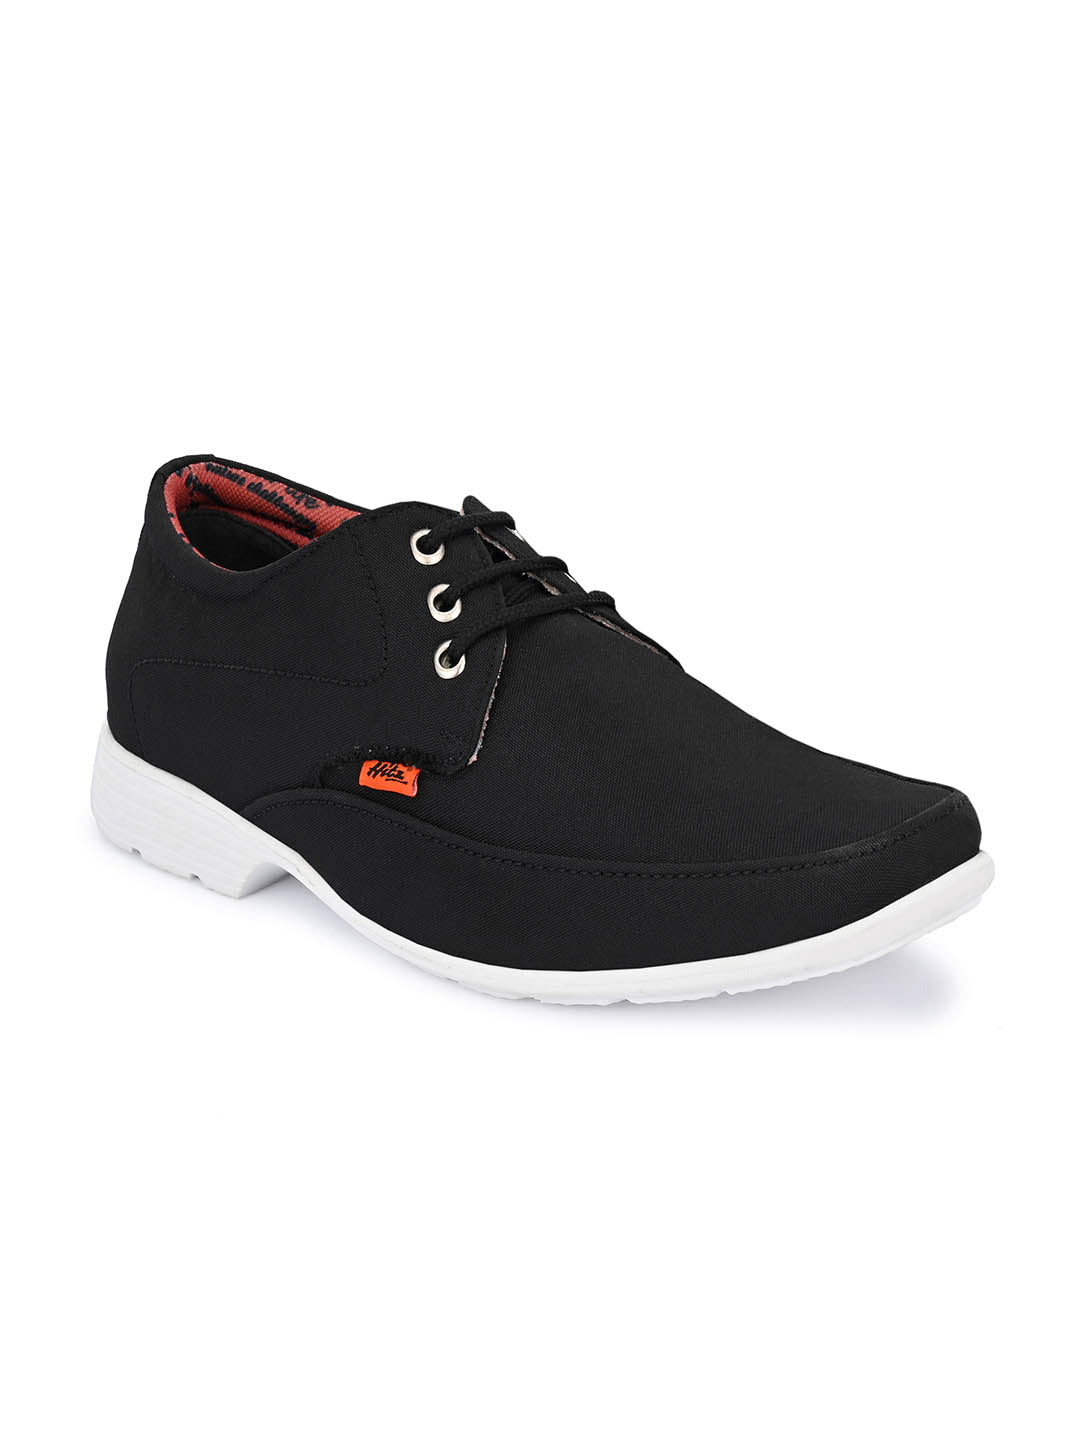 Share more than 135 black casual sneakers super hot